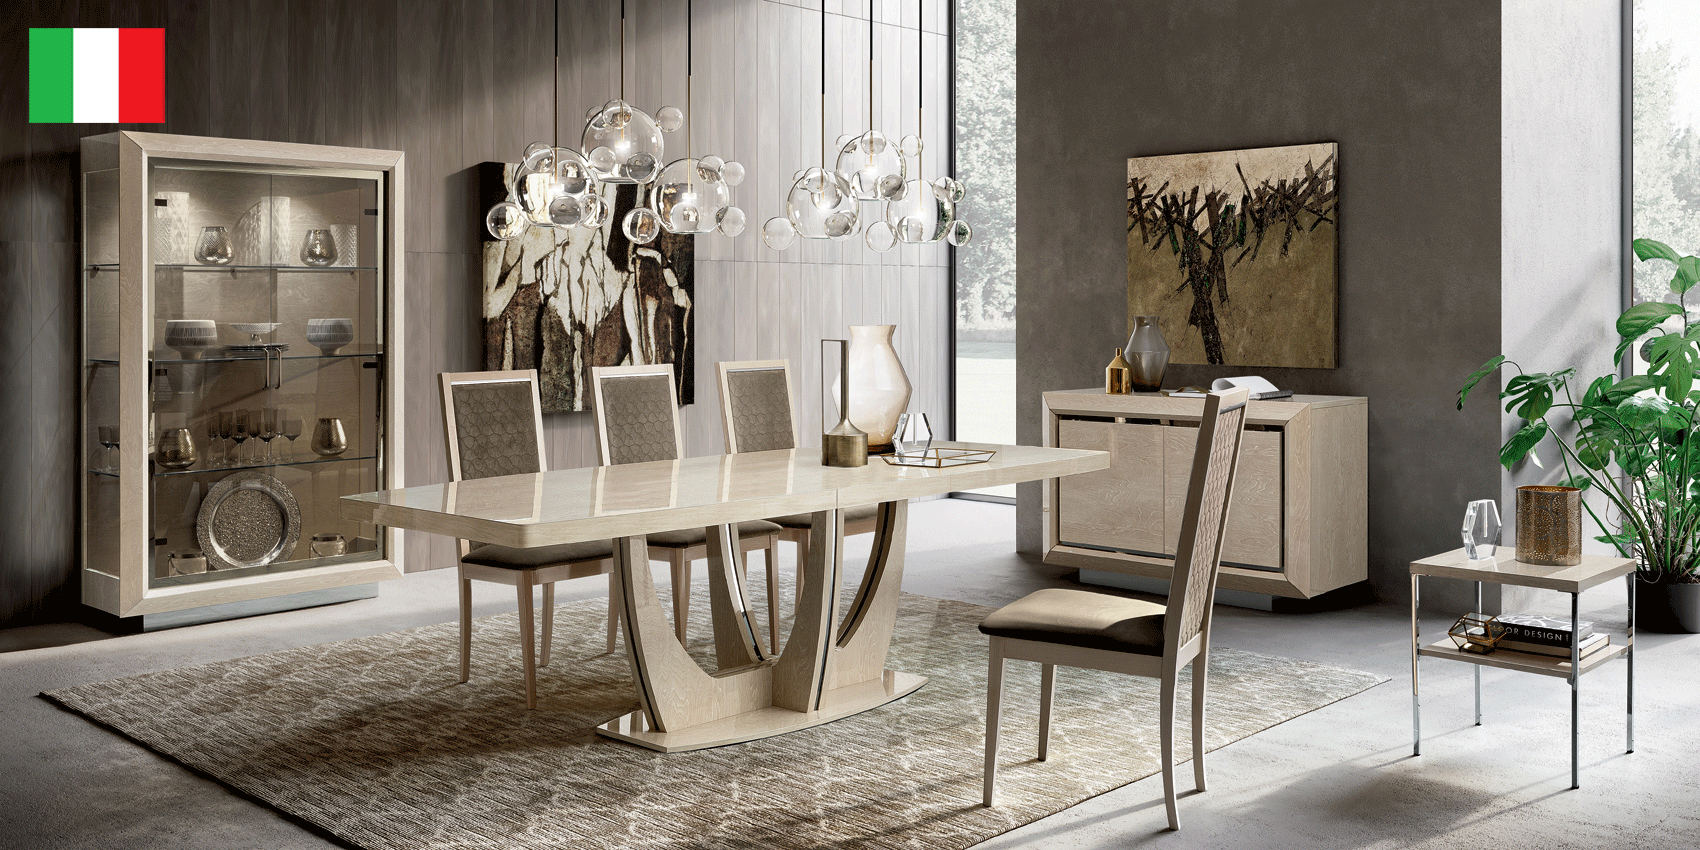 Brands Dupen Dining Rooms, Spain Elite Dining Ivory with Ambra “Rombi” Chairs